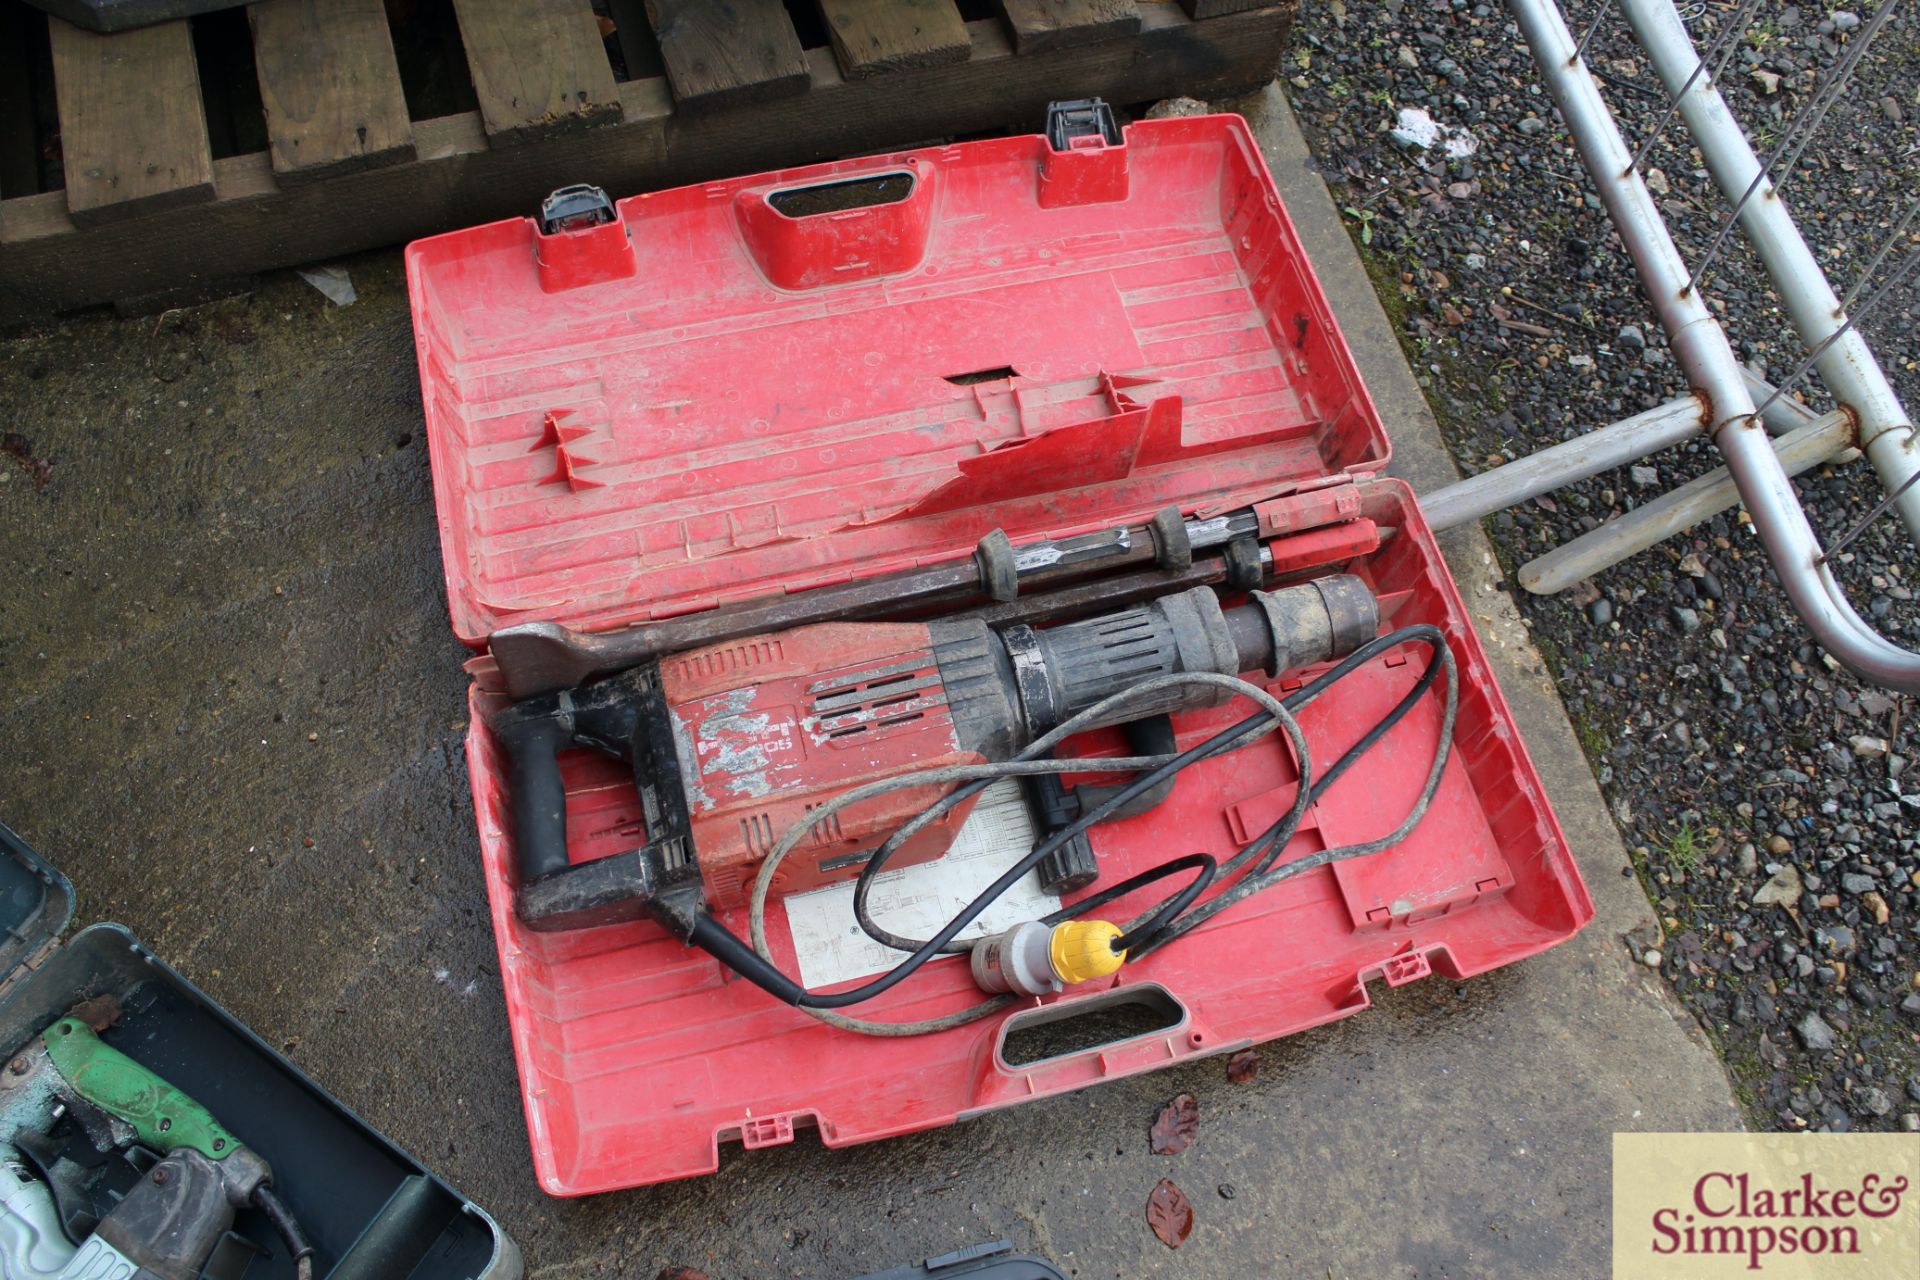 Hilti TE 905-AVR 110V breaker in case with various chisels. Vendor reports this was reconditioned